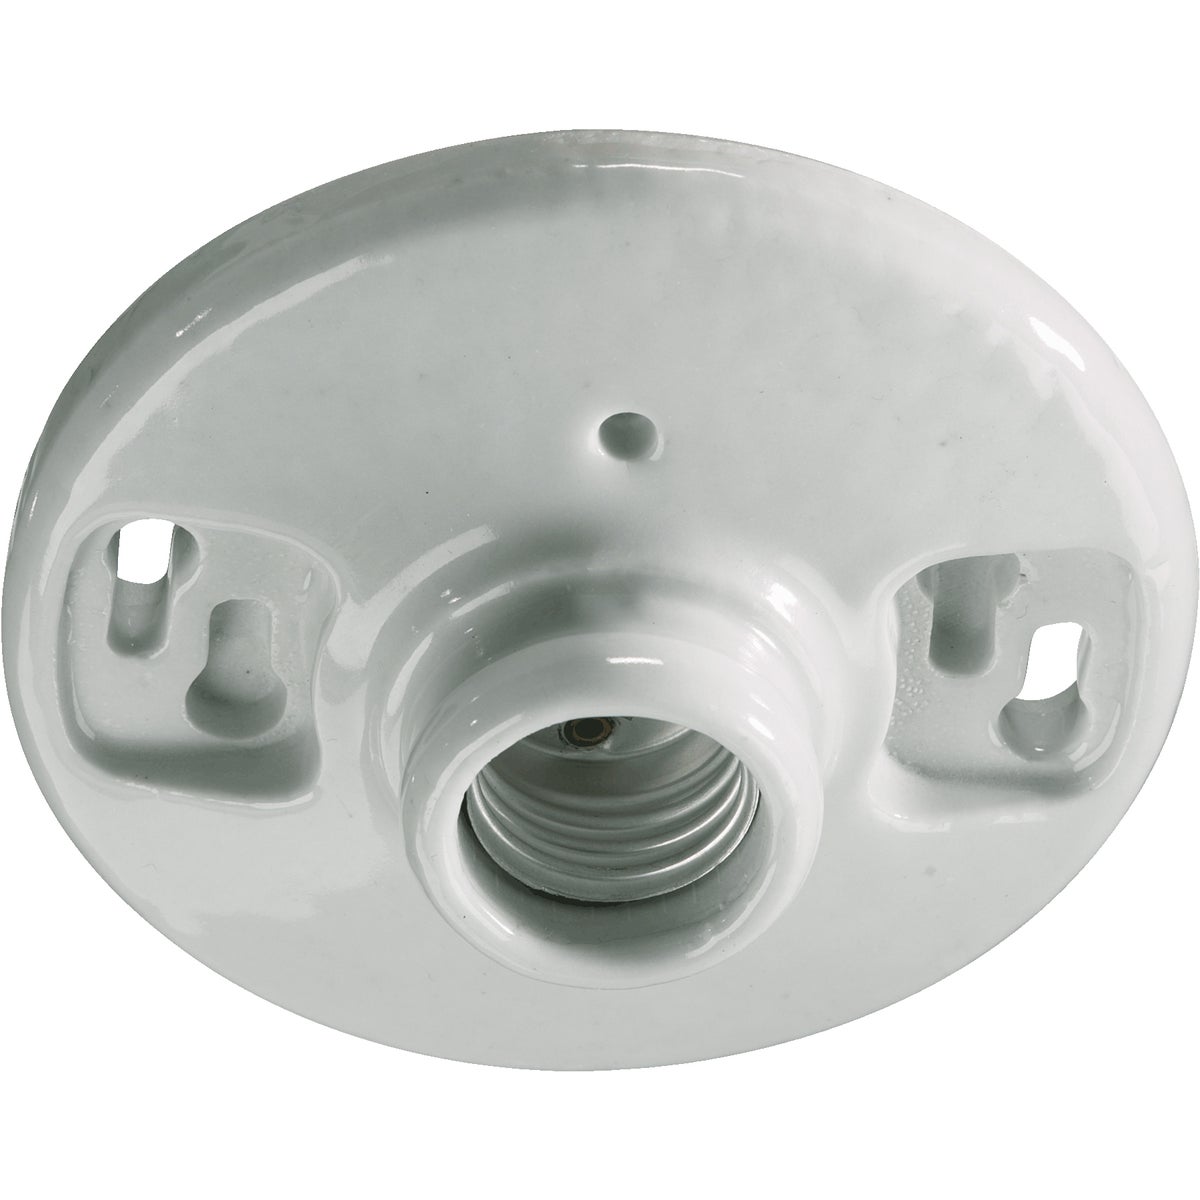 5 inch Ceiling Mount White